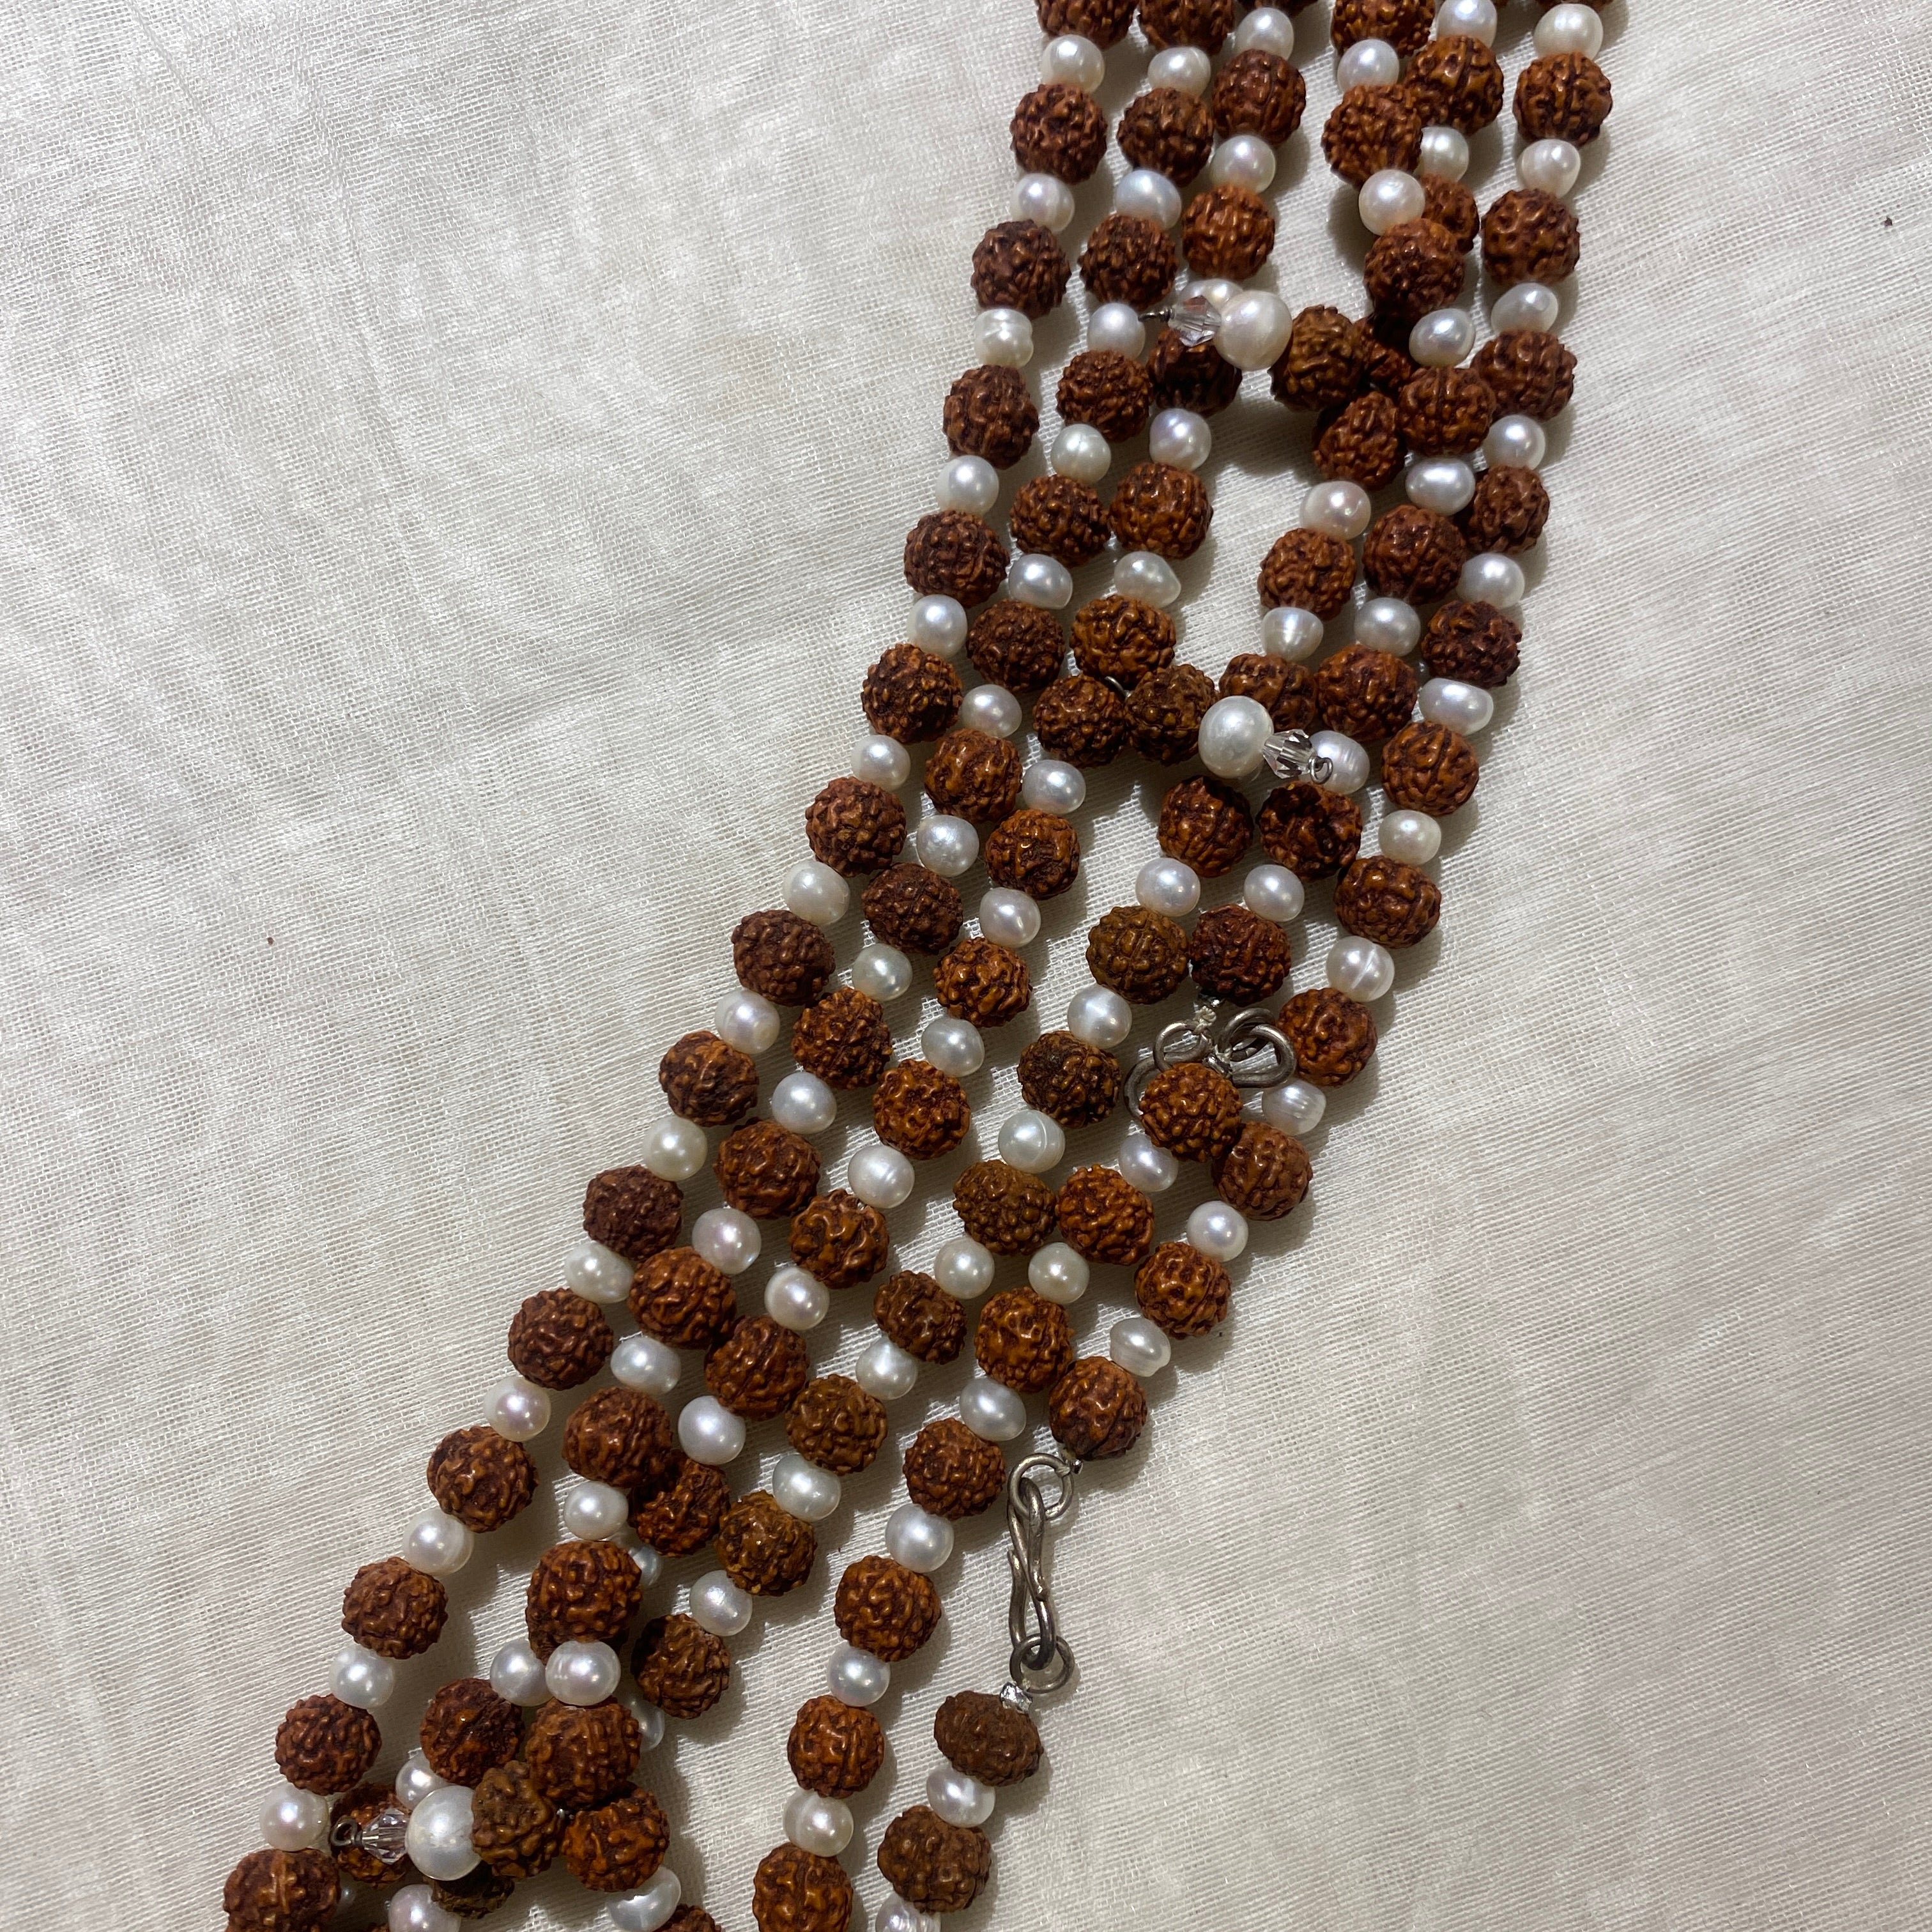 Rudrakasha and Pearl Necklace - Vintage India NYC